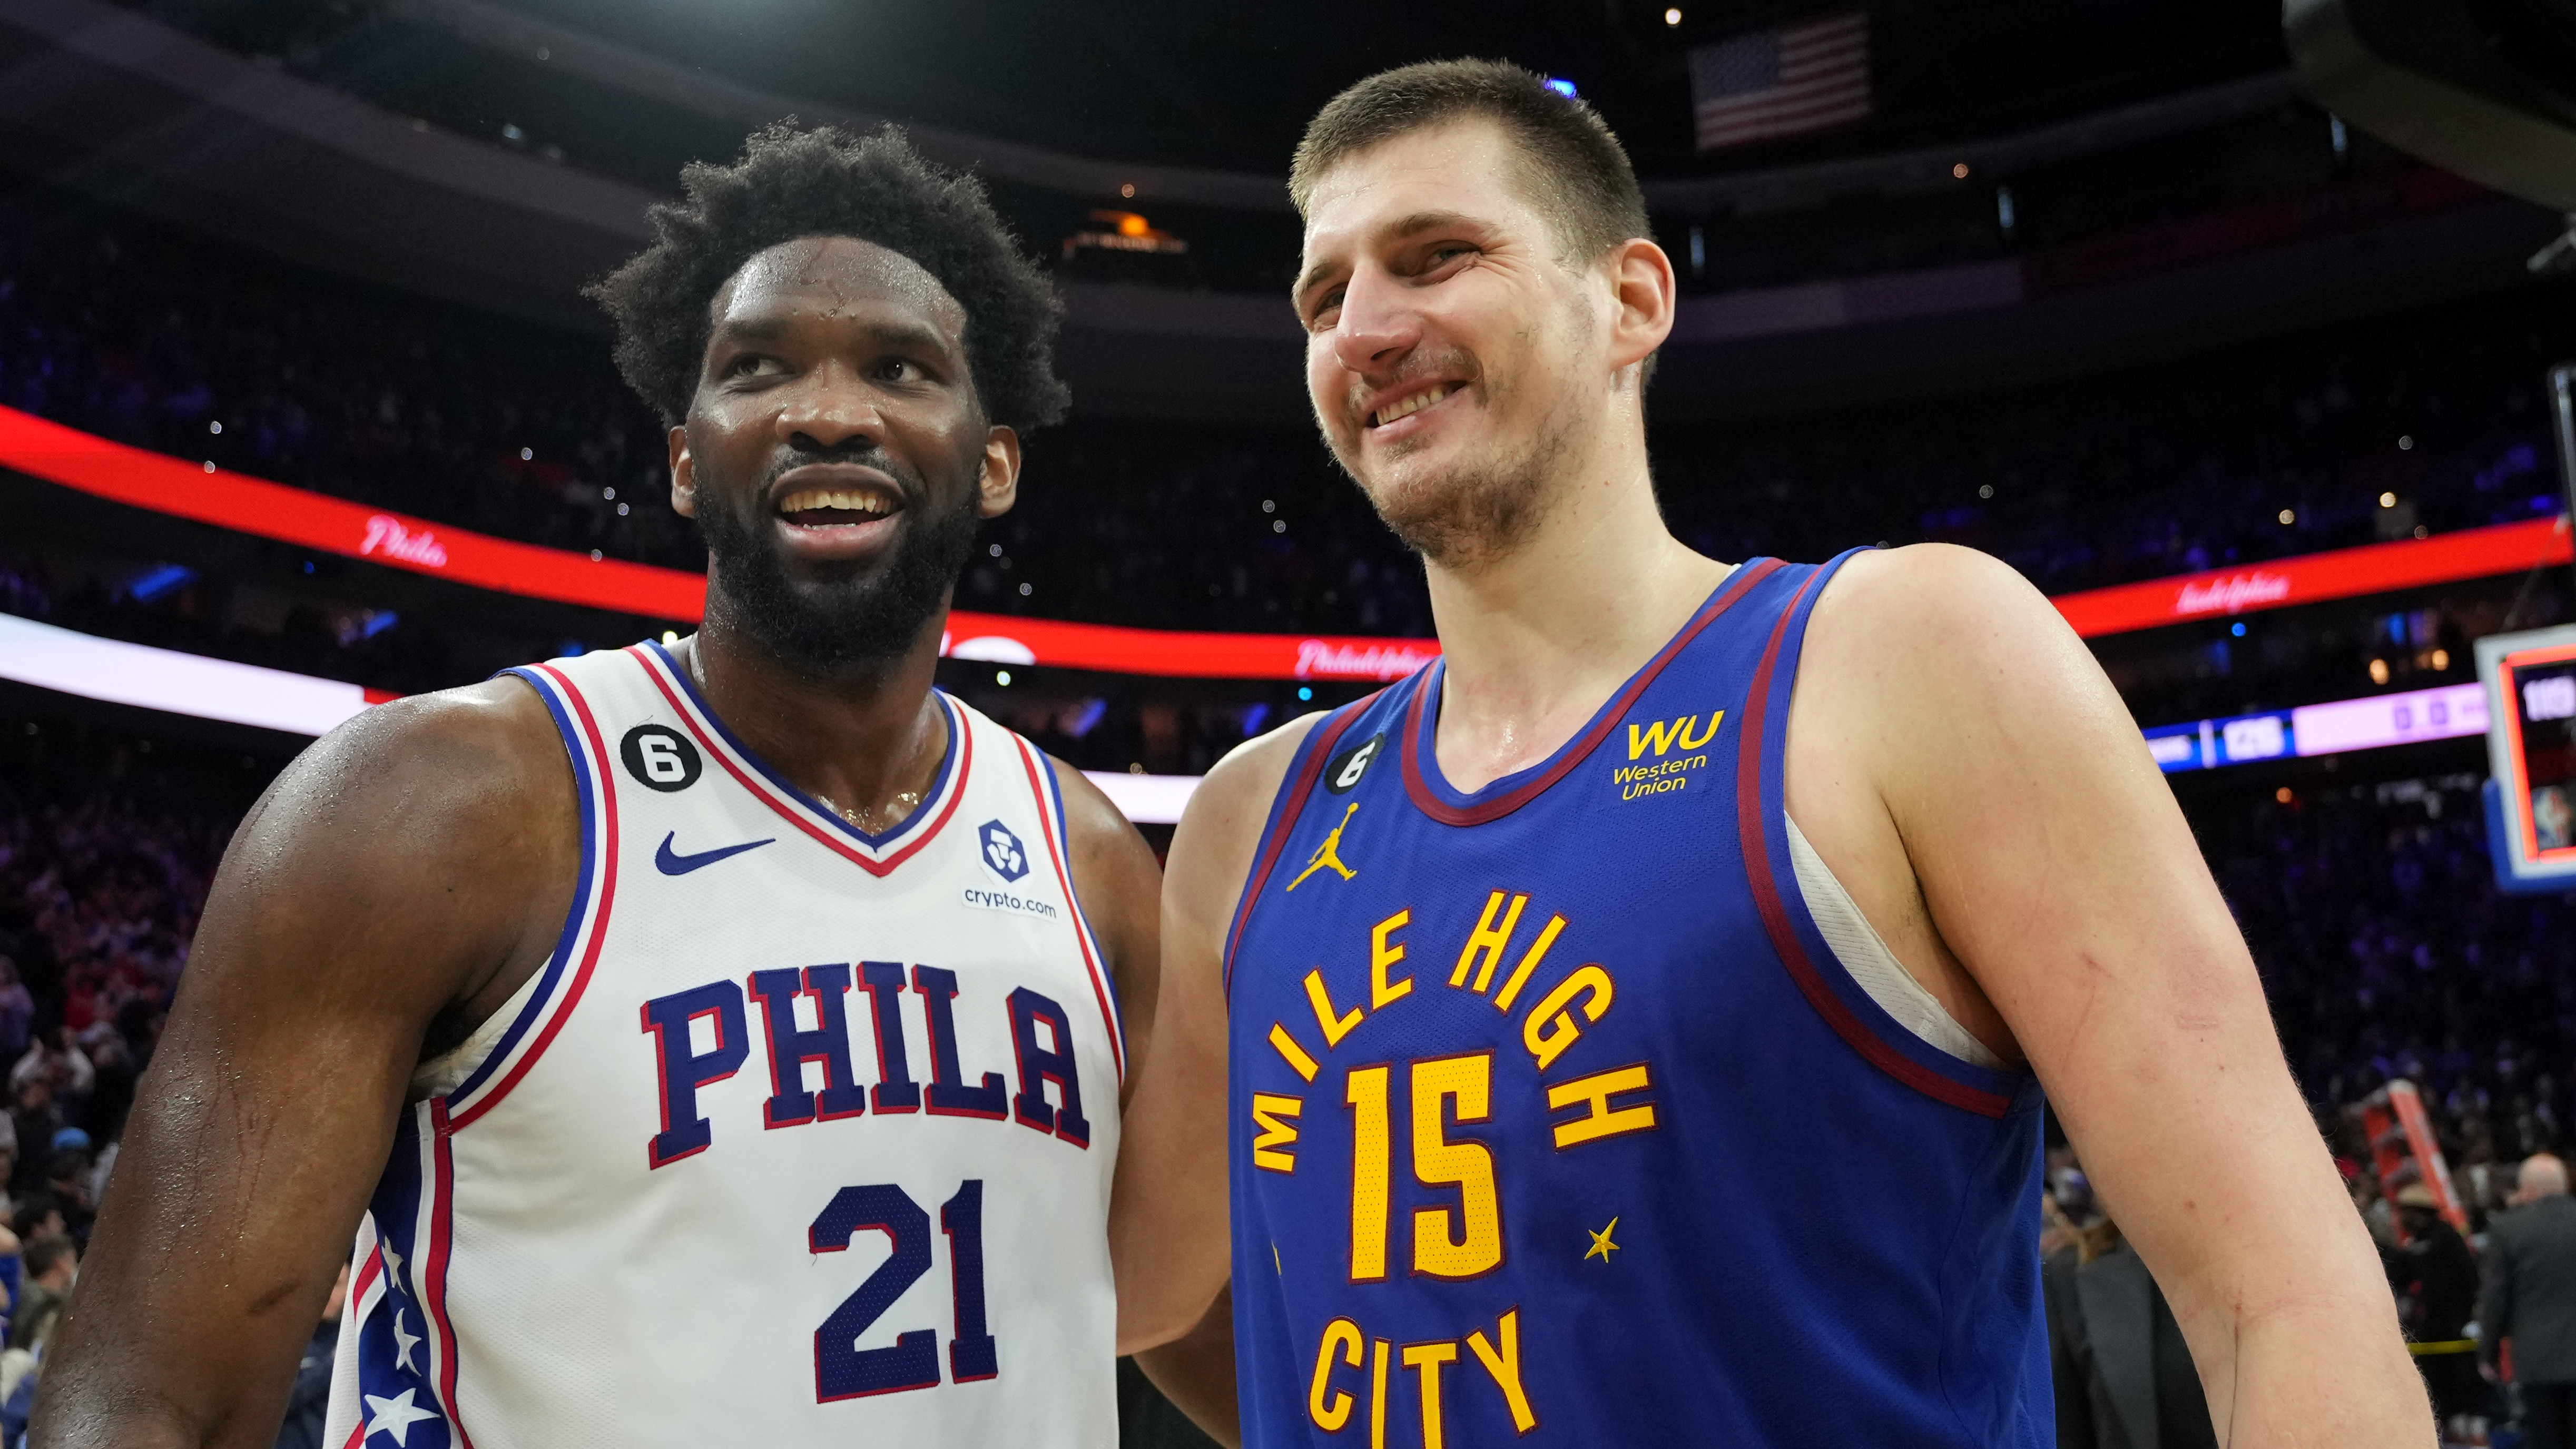 Every player in Philadelphia 76ers history who has worn No. 54